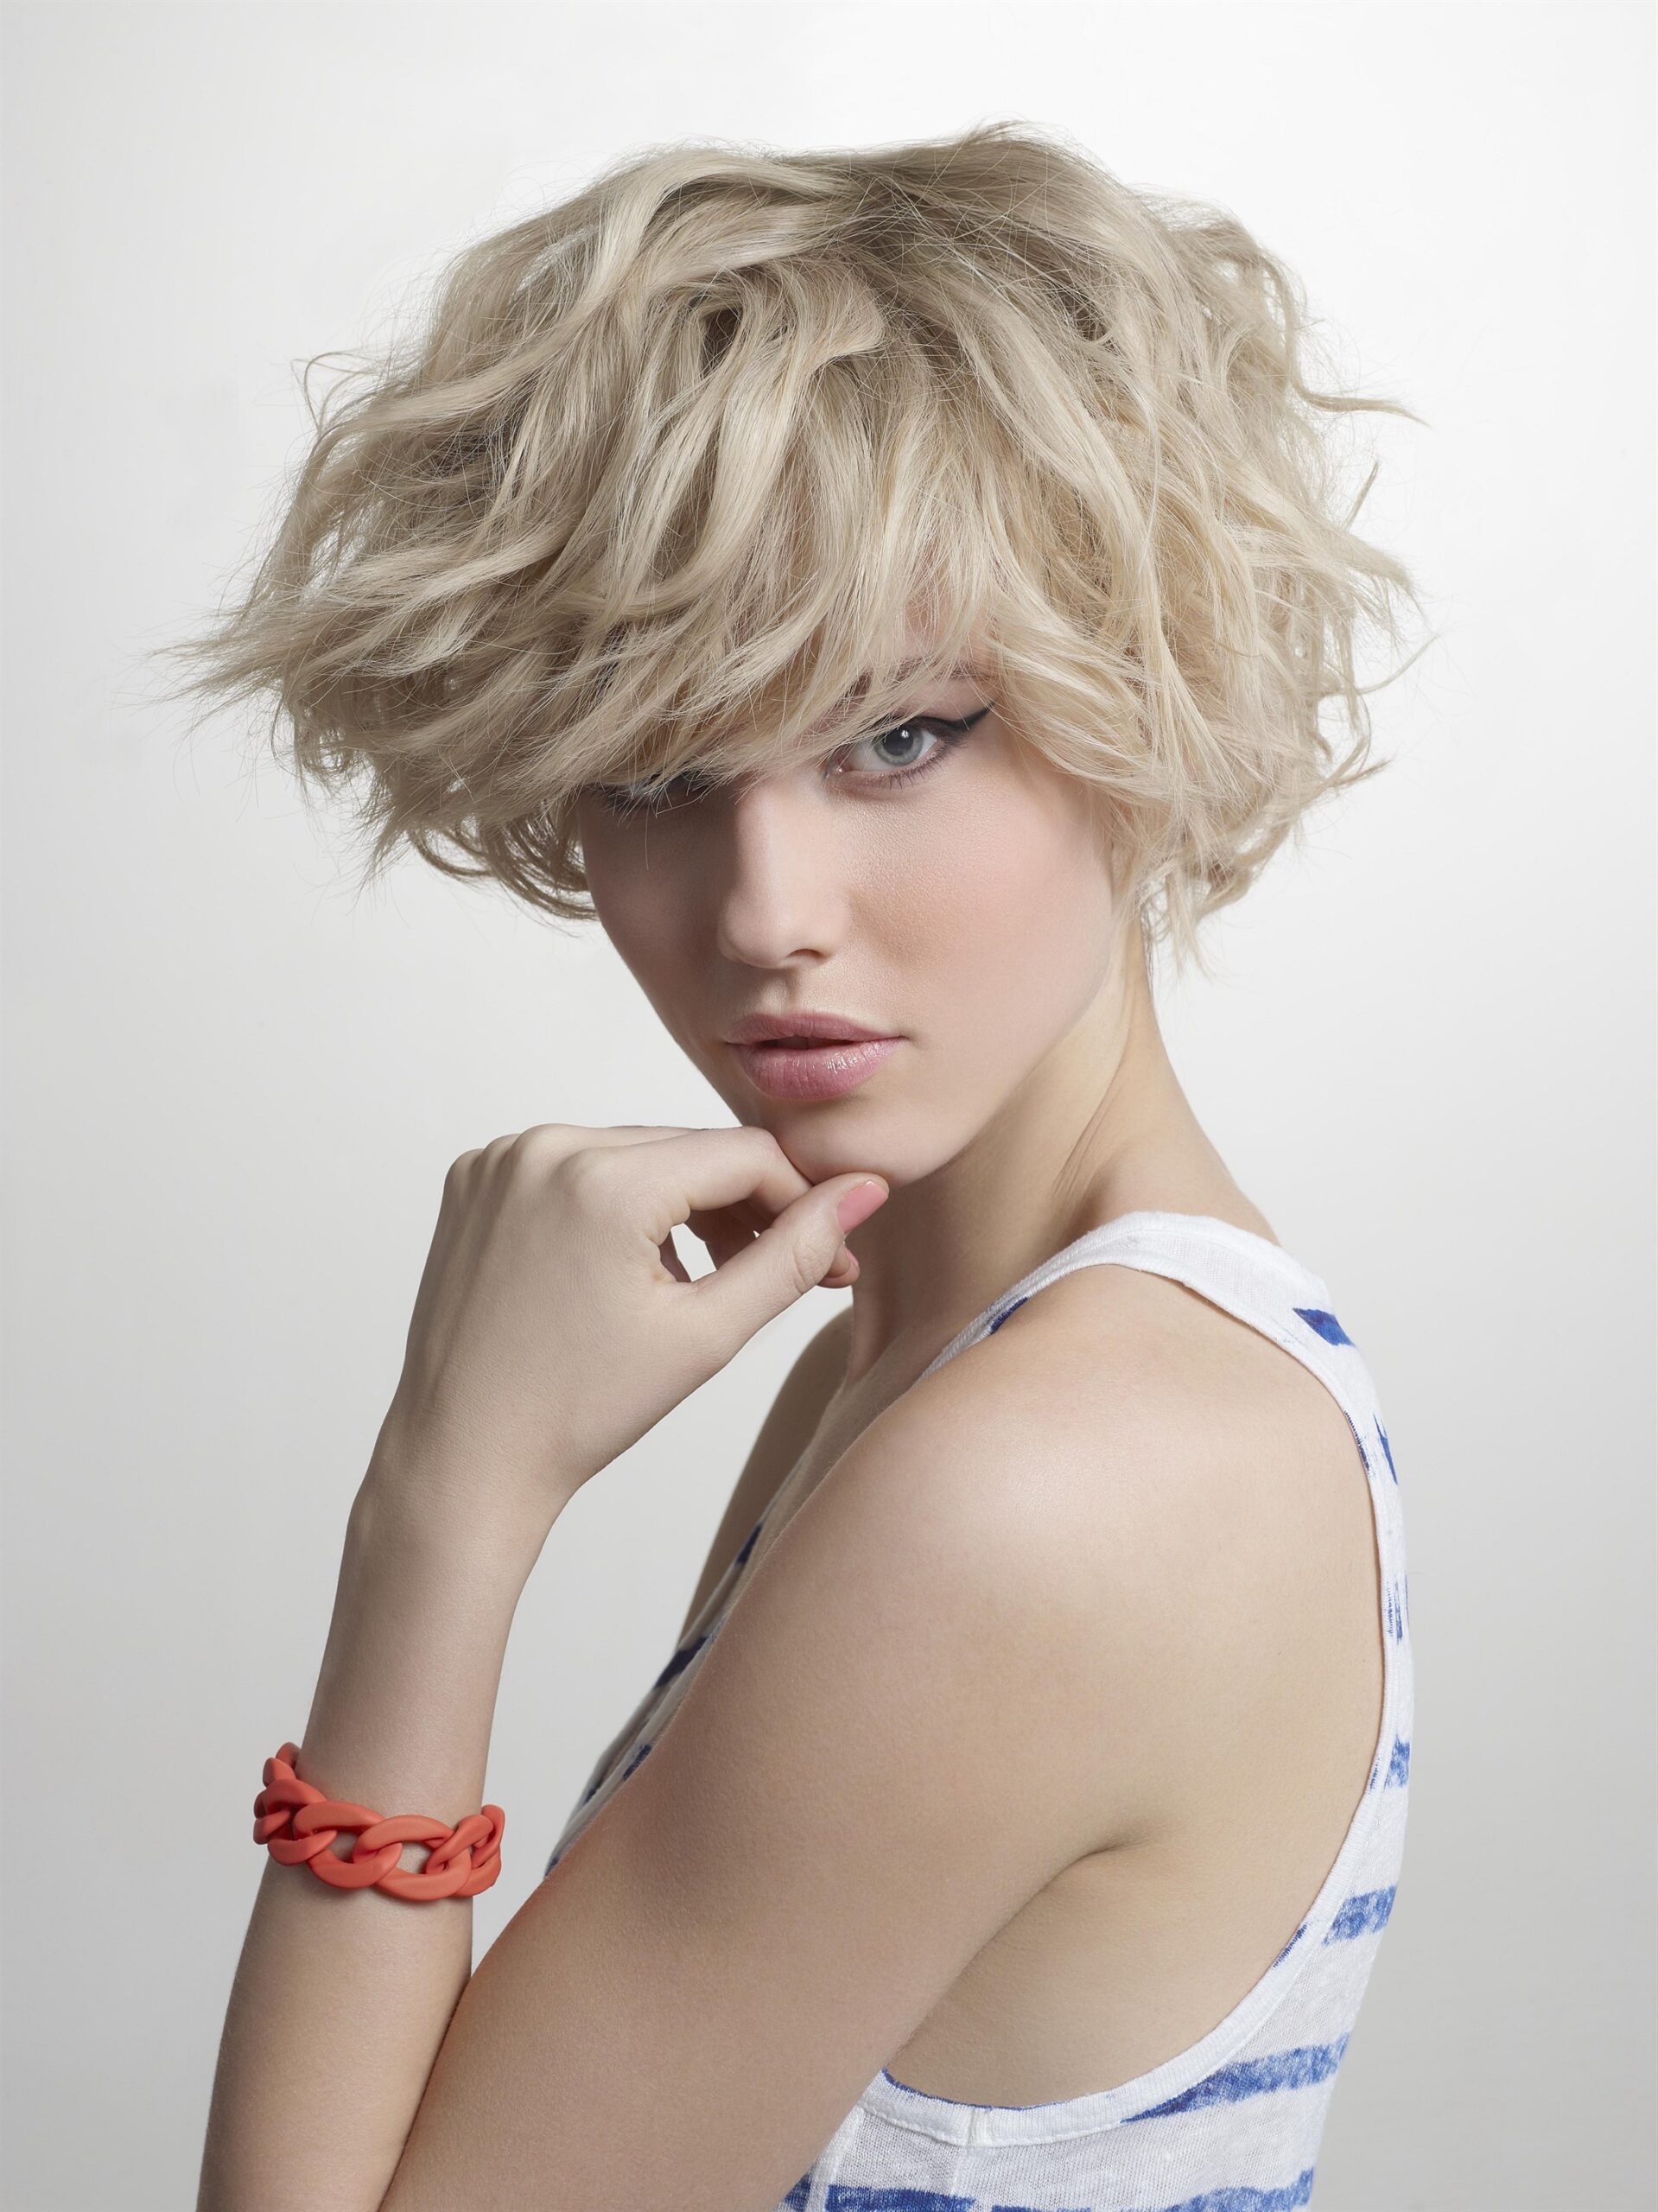 Best Short Hairstyles Messy Hair  Give your hair the perfect look by using stylers. This slightly wavy and slightly messy model is almost dazzling.